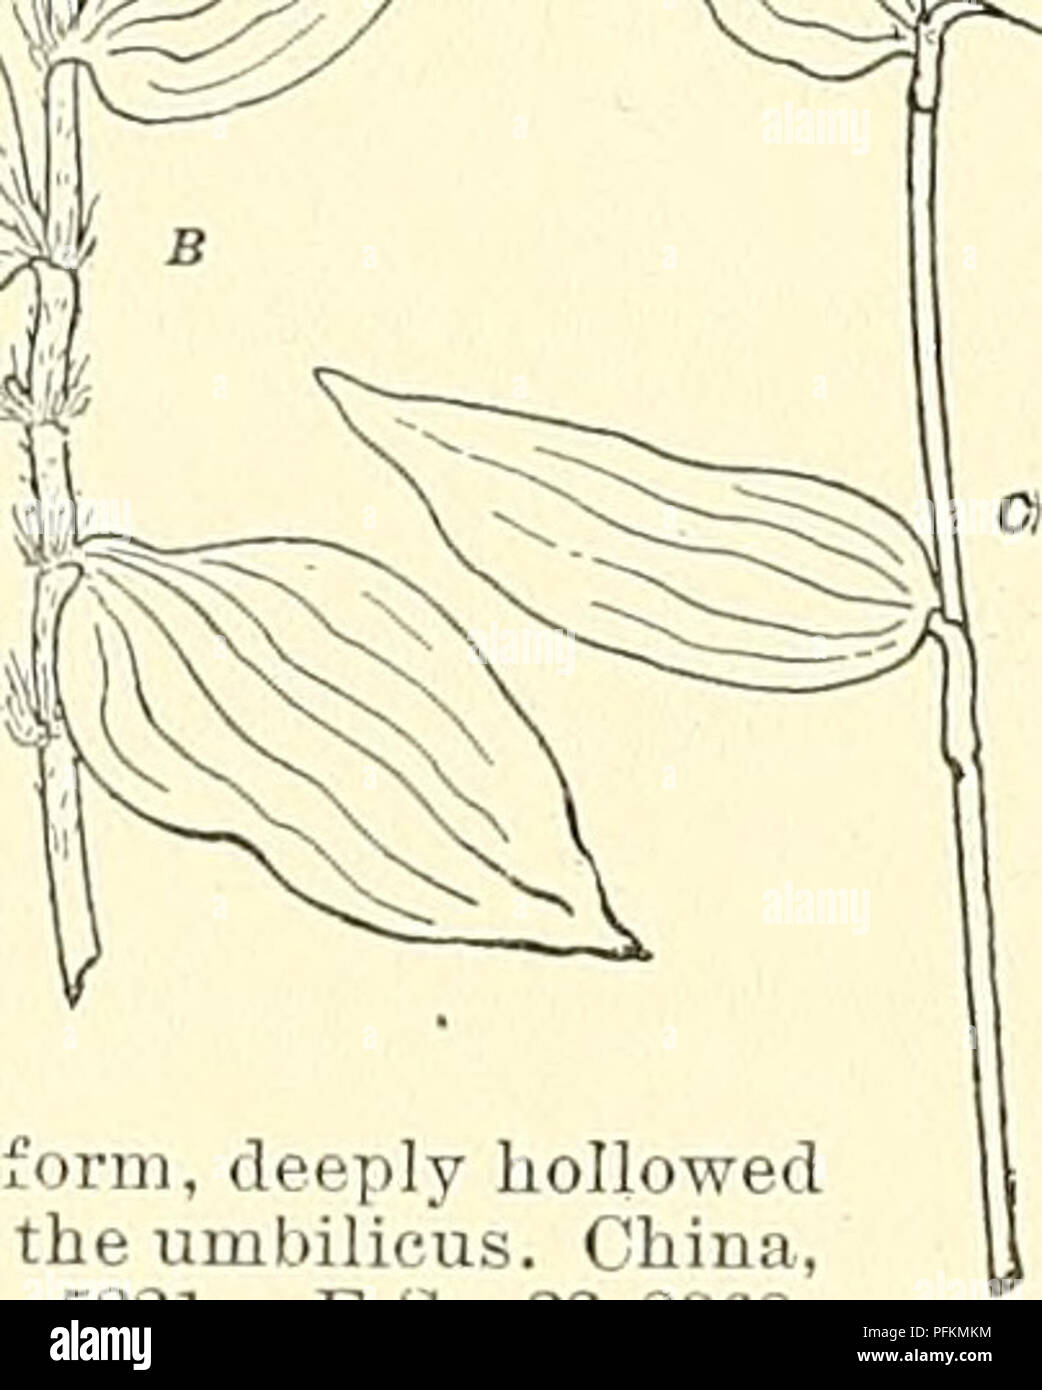 . Cyclopedia of American horticulture, comprising suggestions for cultivation of horticultural plants, descriptions of the species of fruits, vegetables, flowers, and ornamental plants sold in the United States and Canada, together with geographical and biographical sketches. Gardening. Tradescantia flumiiiensis : tender, sheaths hairy at top; flowers white. B, Ze- bnna pendula : tender ; sheaths hairy at top and bottom; flowers rose-red. C, Oommclina nudiilora : hardy ; sheaths crJabrons; flowers blue. 2-4 on a tubercle: drupe reniform, deeply hollowed on one side; embryo opposite the umbilic Stock Photo